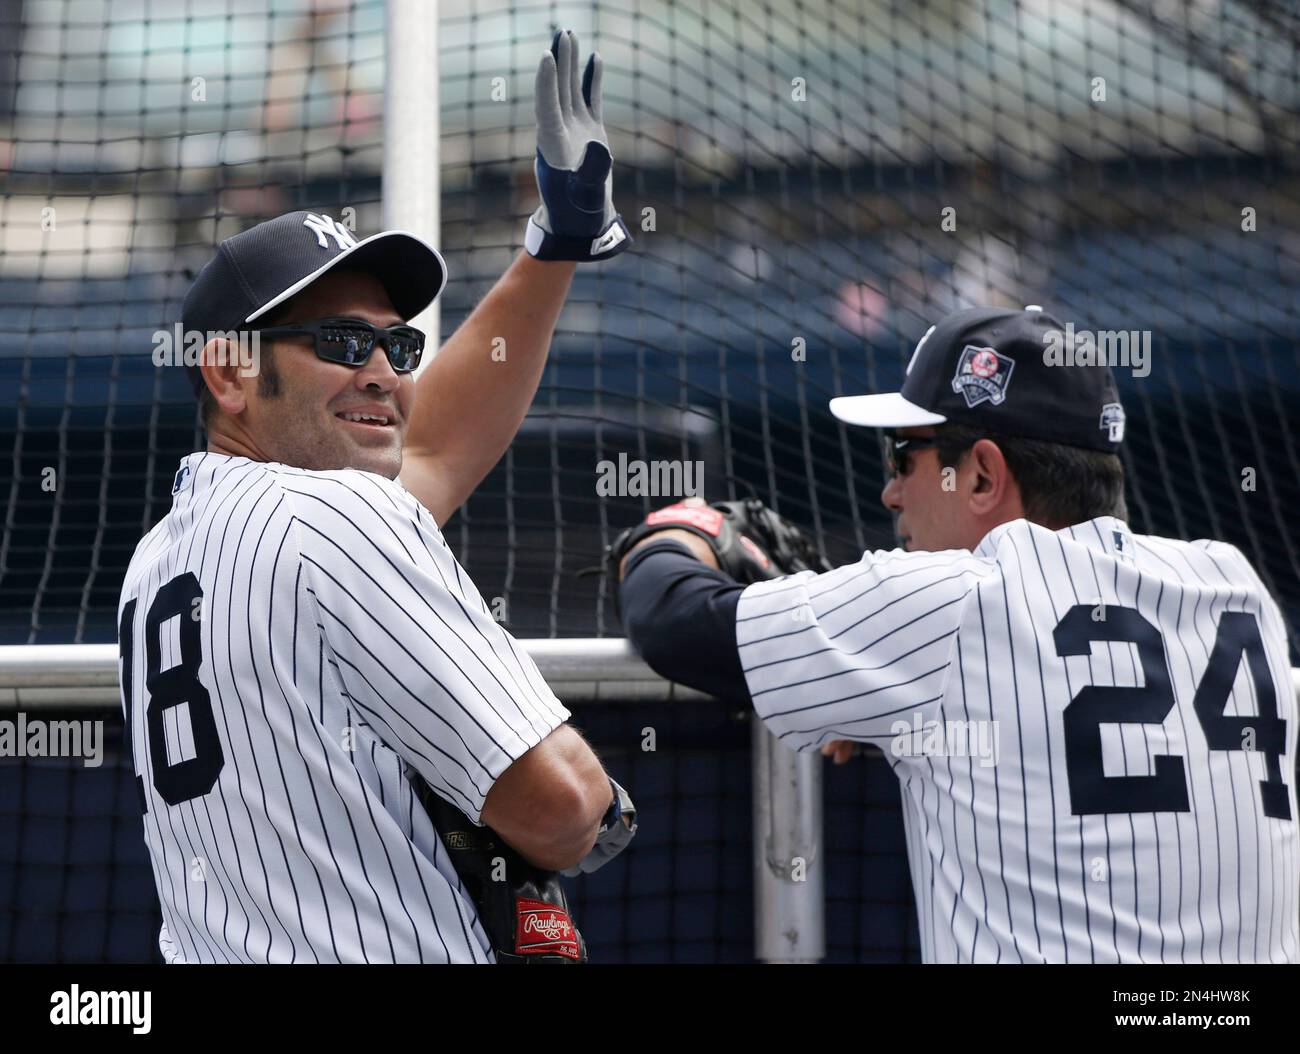 Johnny Damon, Hideki Matsui to be at Yankees Old-Timers' Day - Newsday